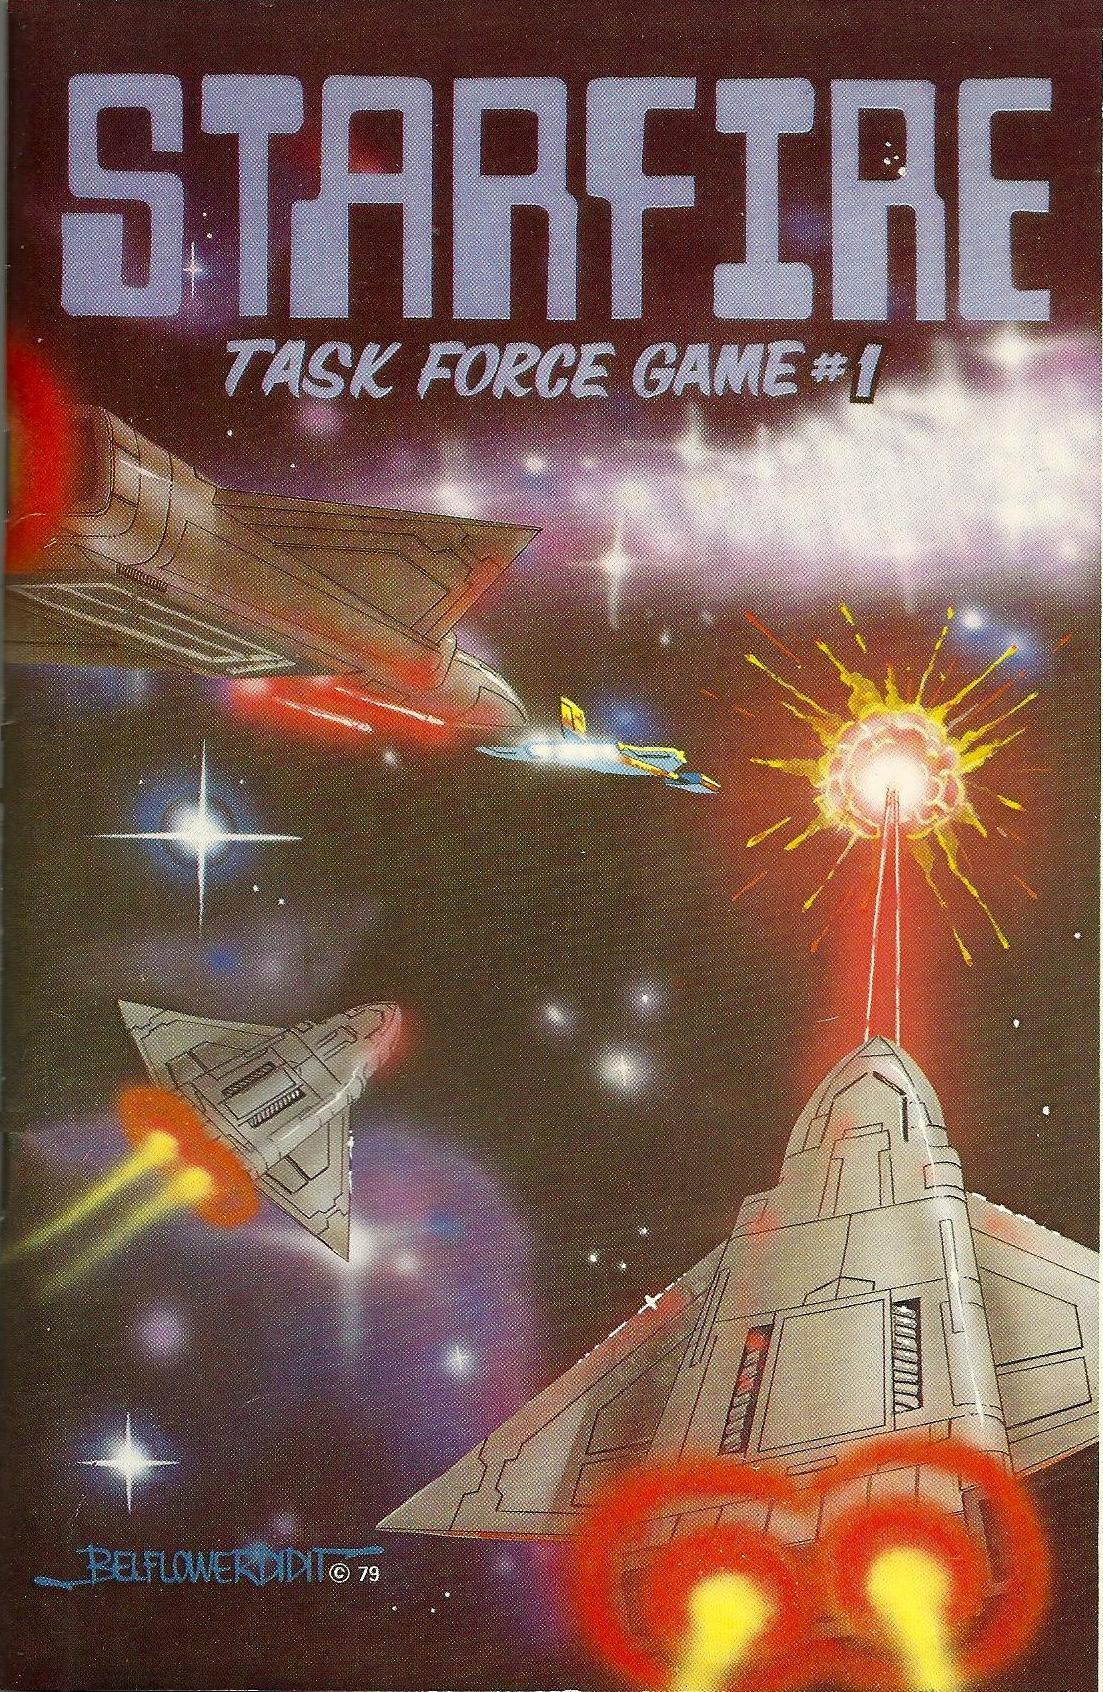 Task Force Games Starfire